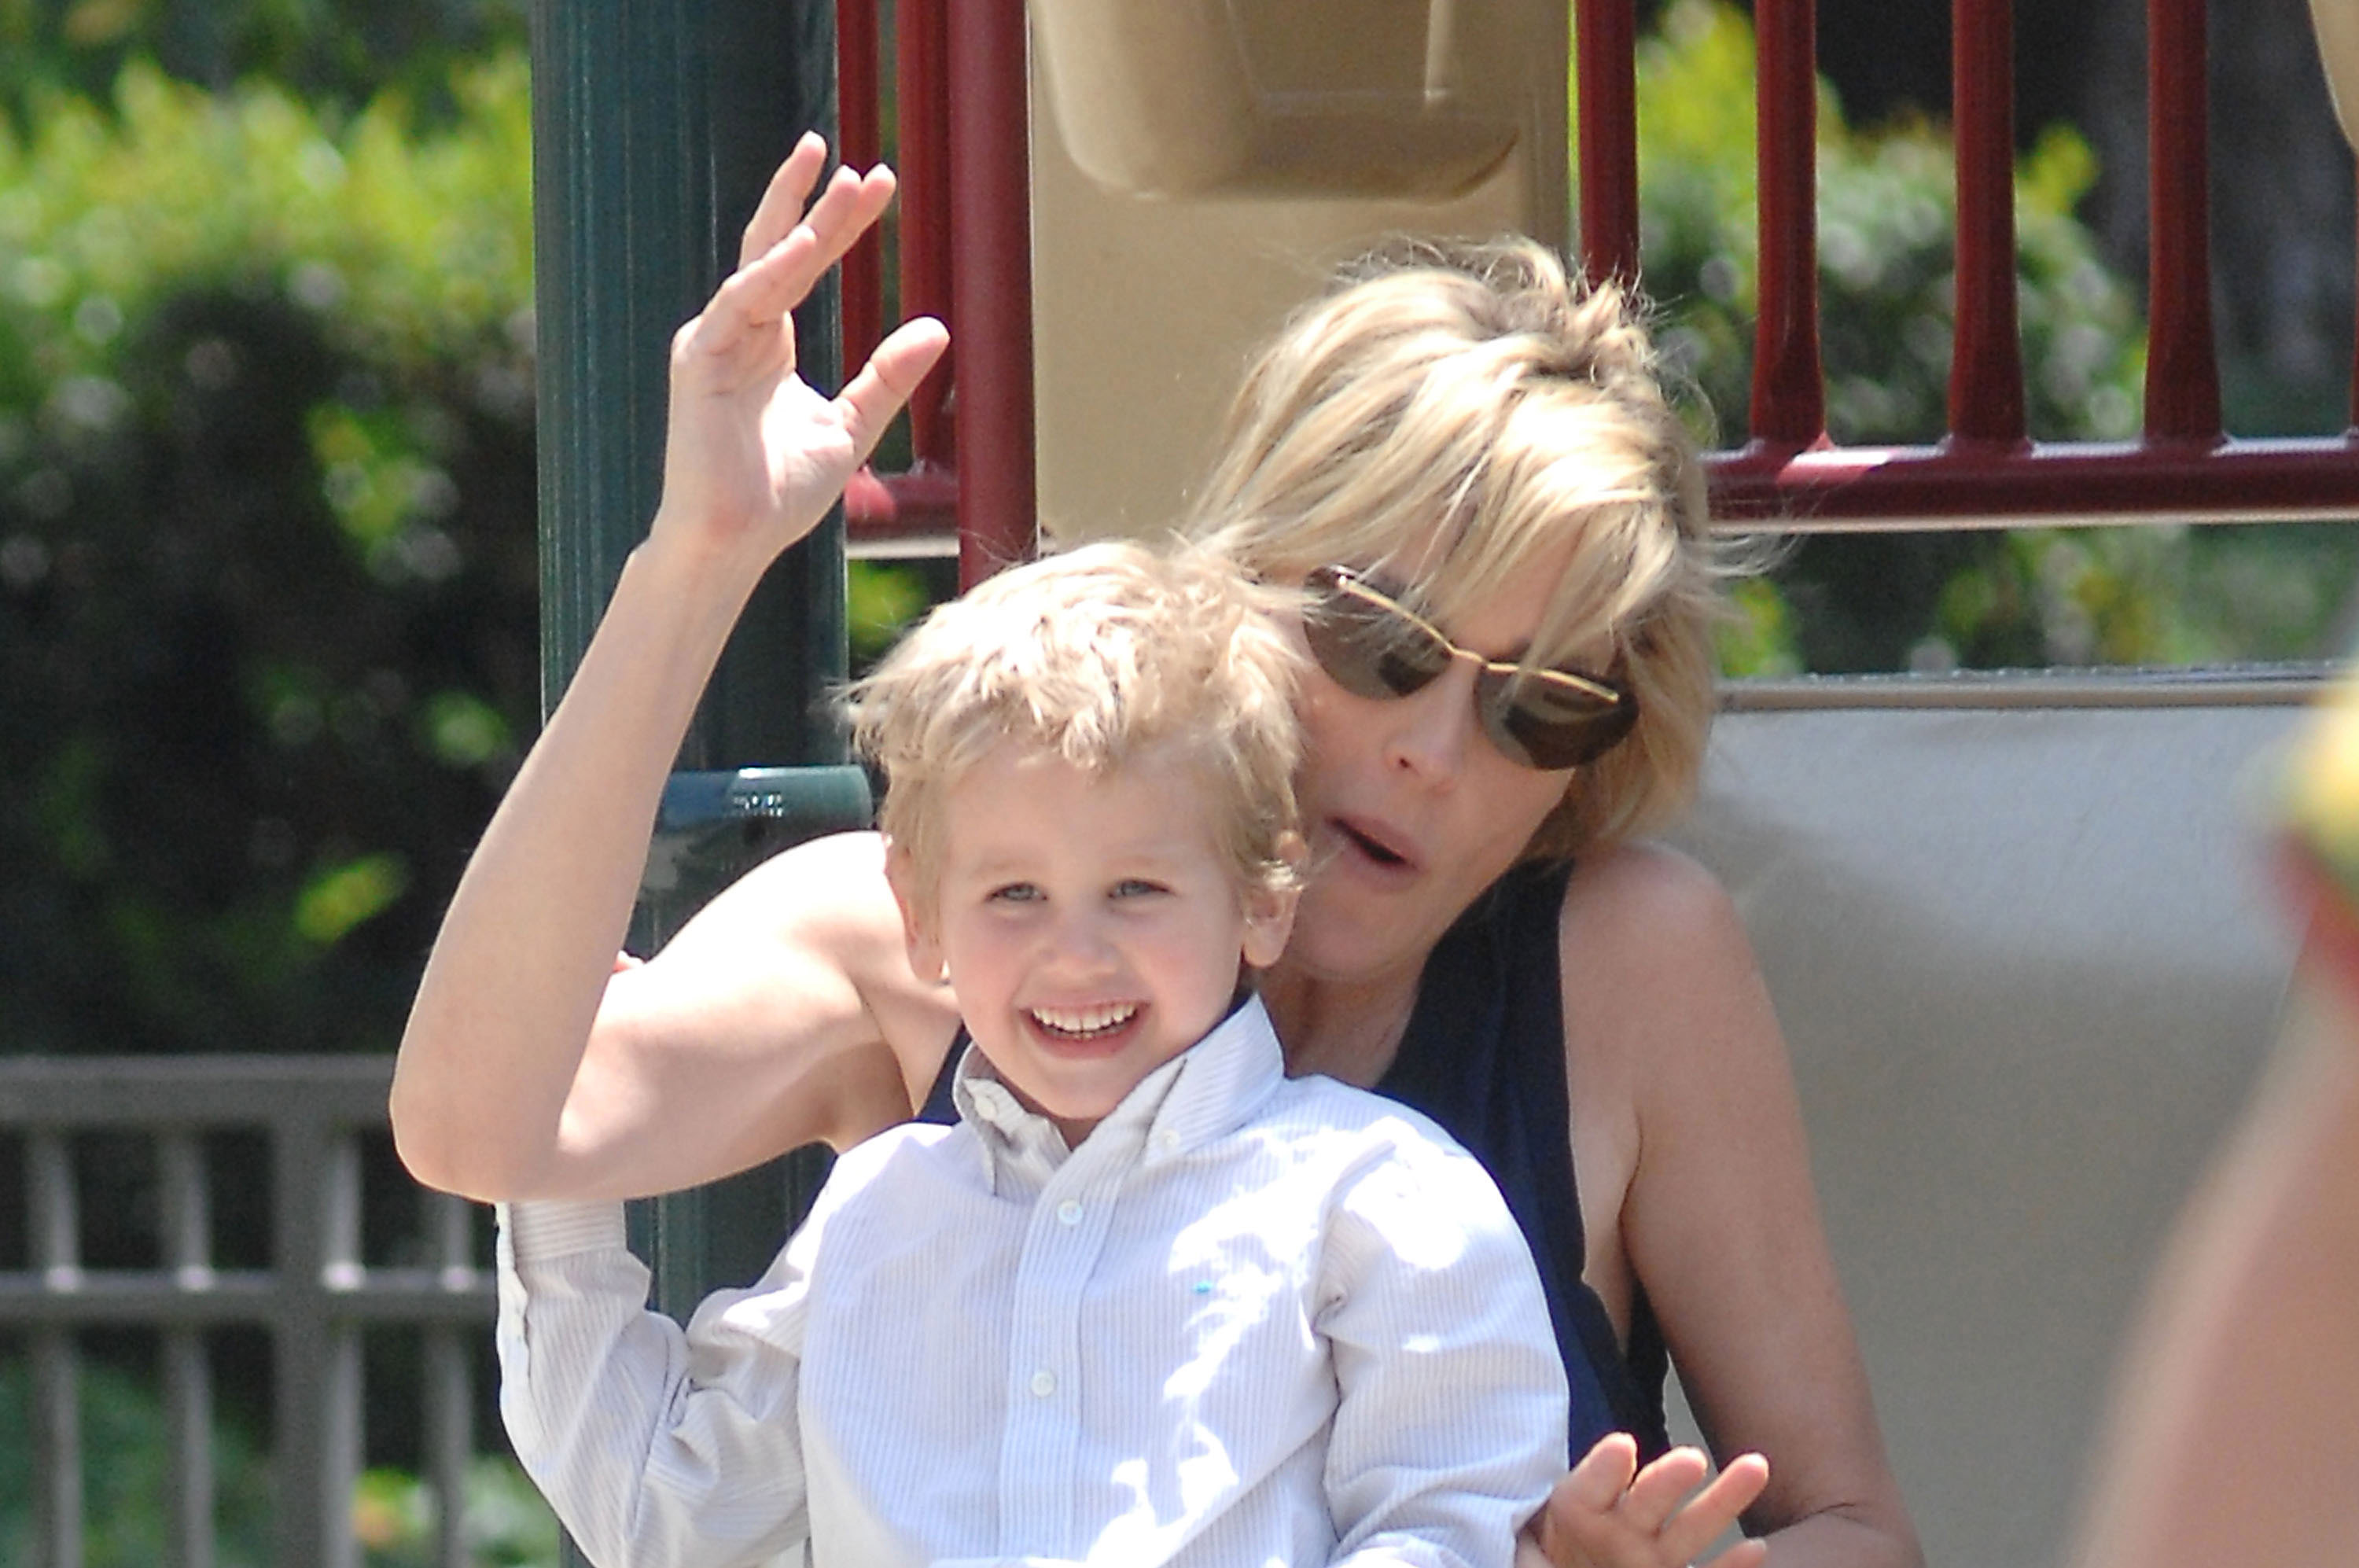 Sharon Stone plays with her son, Laird, on a slide